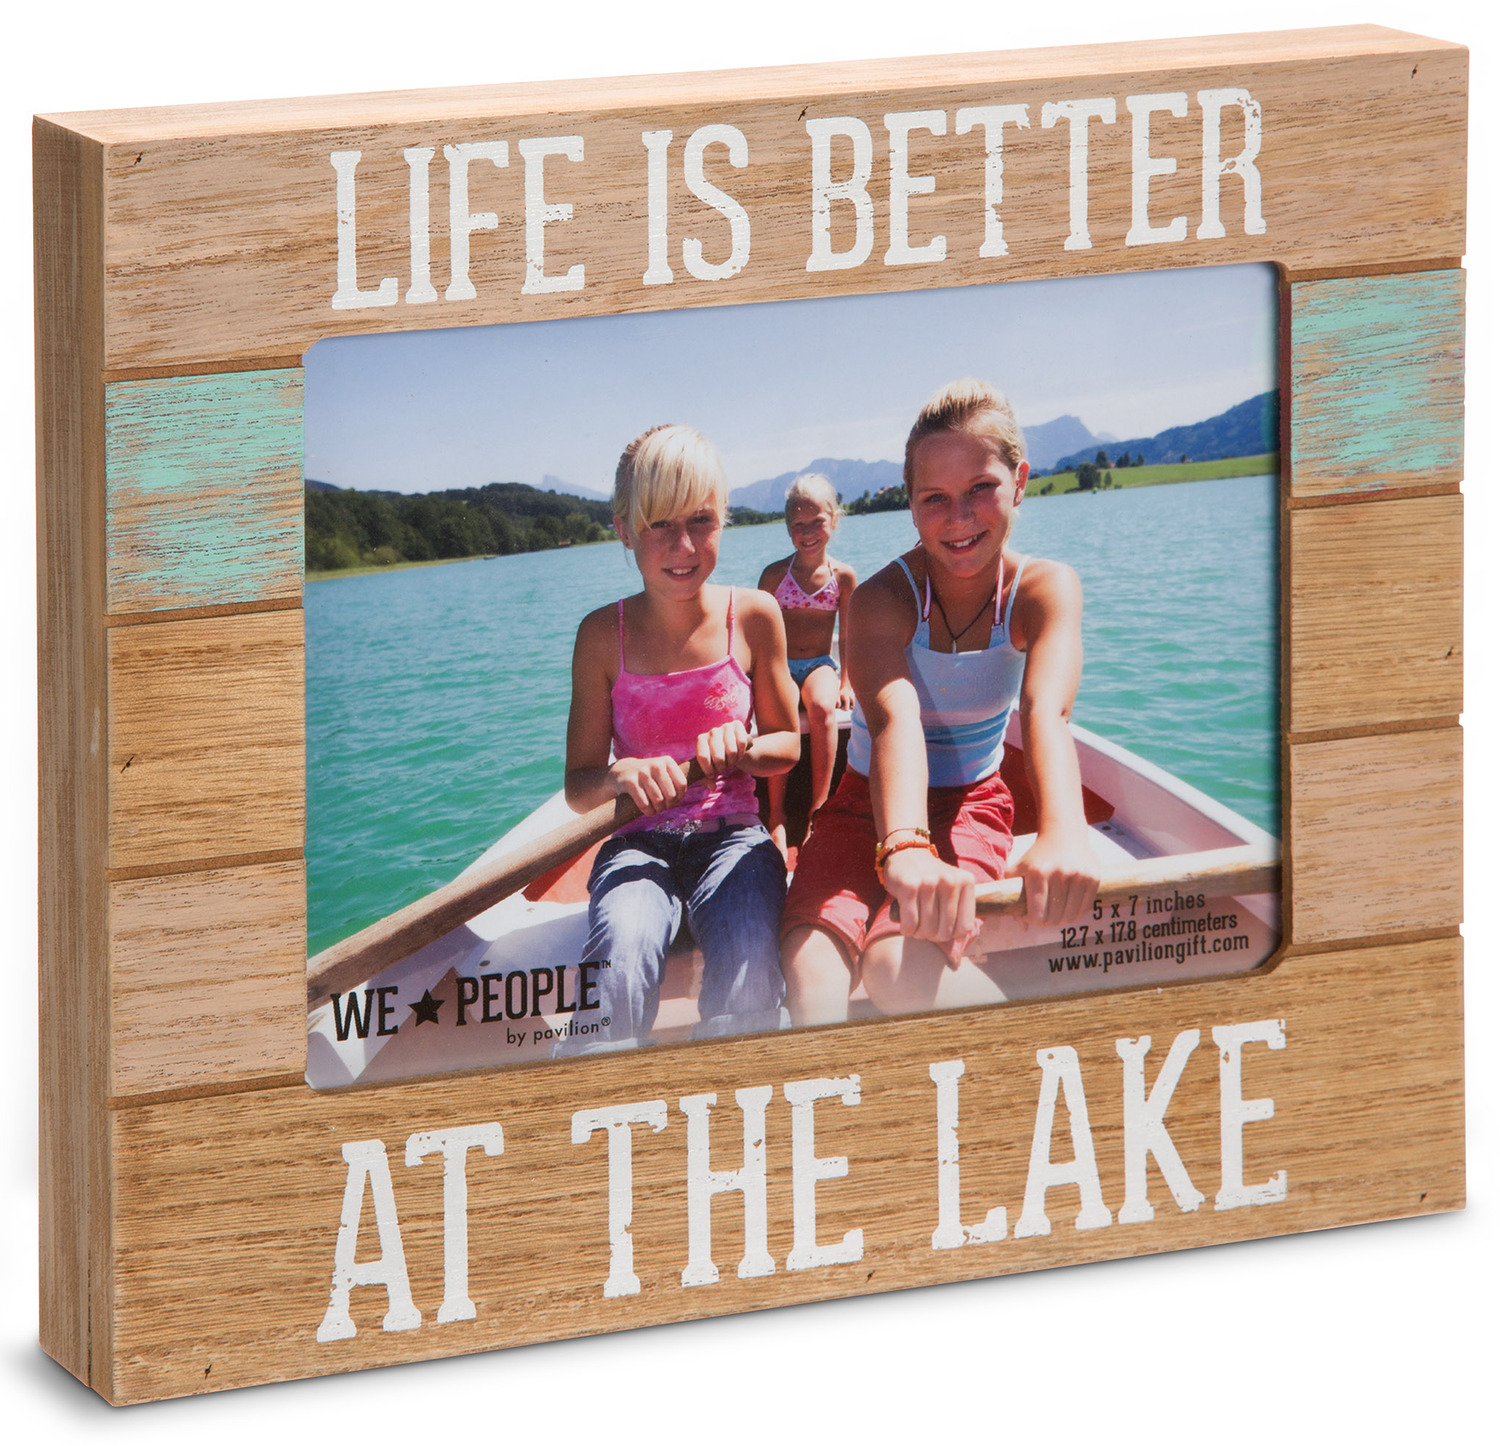 Lake People by We People - Lake People - 7.25" x 9" Frame
(Holds 5" x 7" photo)